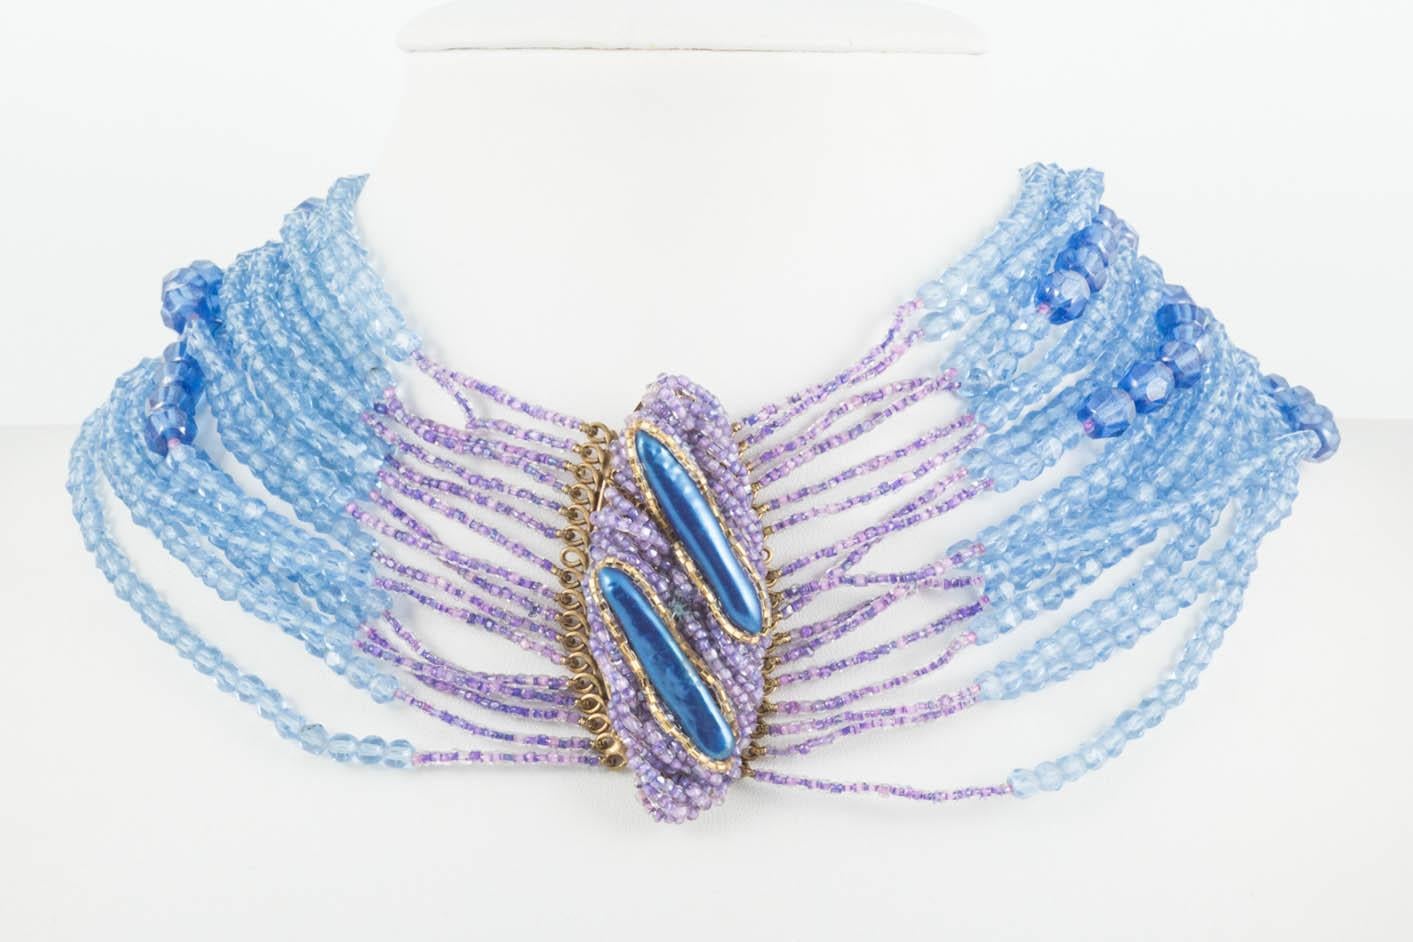 A beautiful and bright necklace and earrings from Milan based company Ornella, contemporaries of Coppola e Toppo. Sixteen rows of mixed faceted demi crystal beads hand in graduated rows from a large and unusual clasp, encrusted in micro beads and